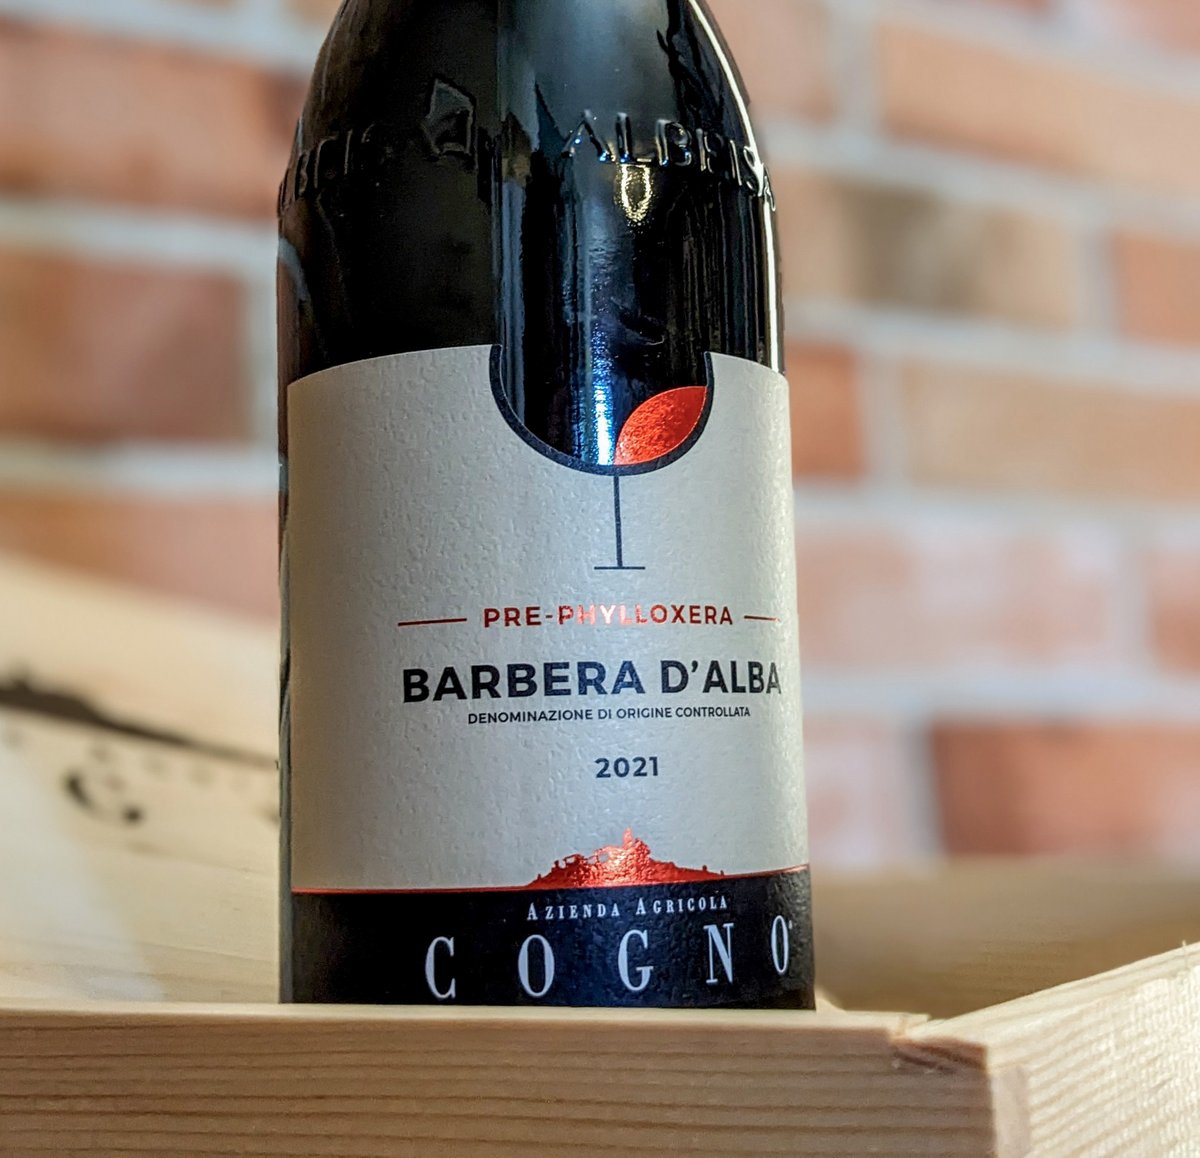 Barbera d'Alba Pre-phylloxera 2021: a wine of rare intensity and richness, produced with grapes from one of the last archaic vineyards of the Langa, an open-air museum of viticulture of yesteryear. 

#elviocogno #barbera #prephylloxera